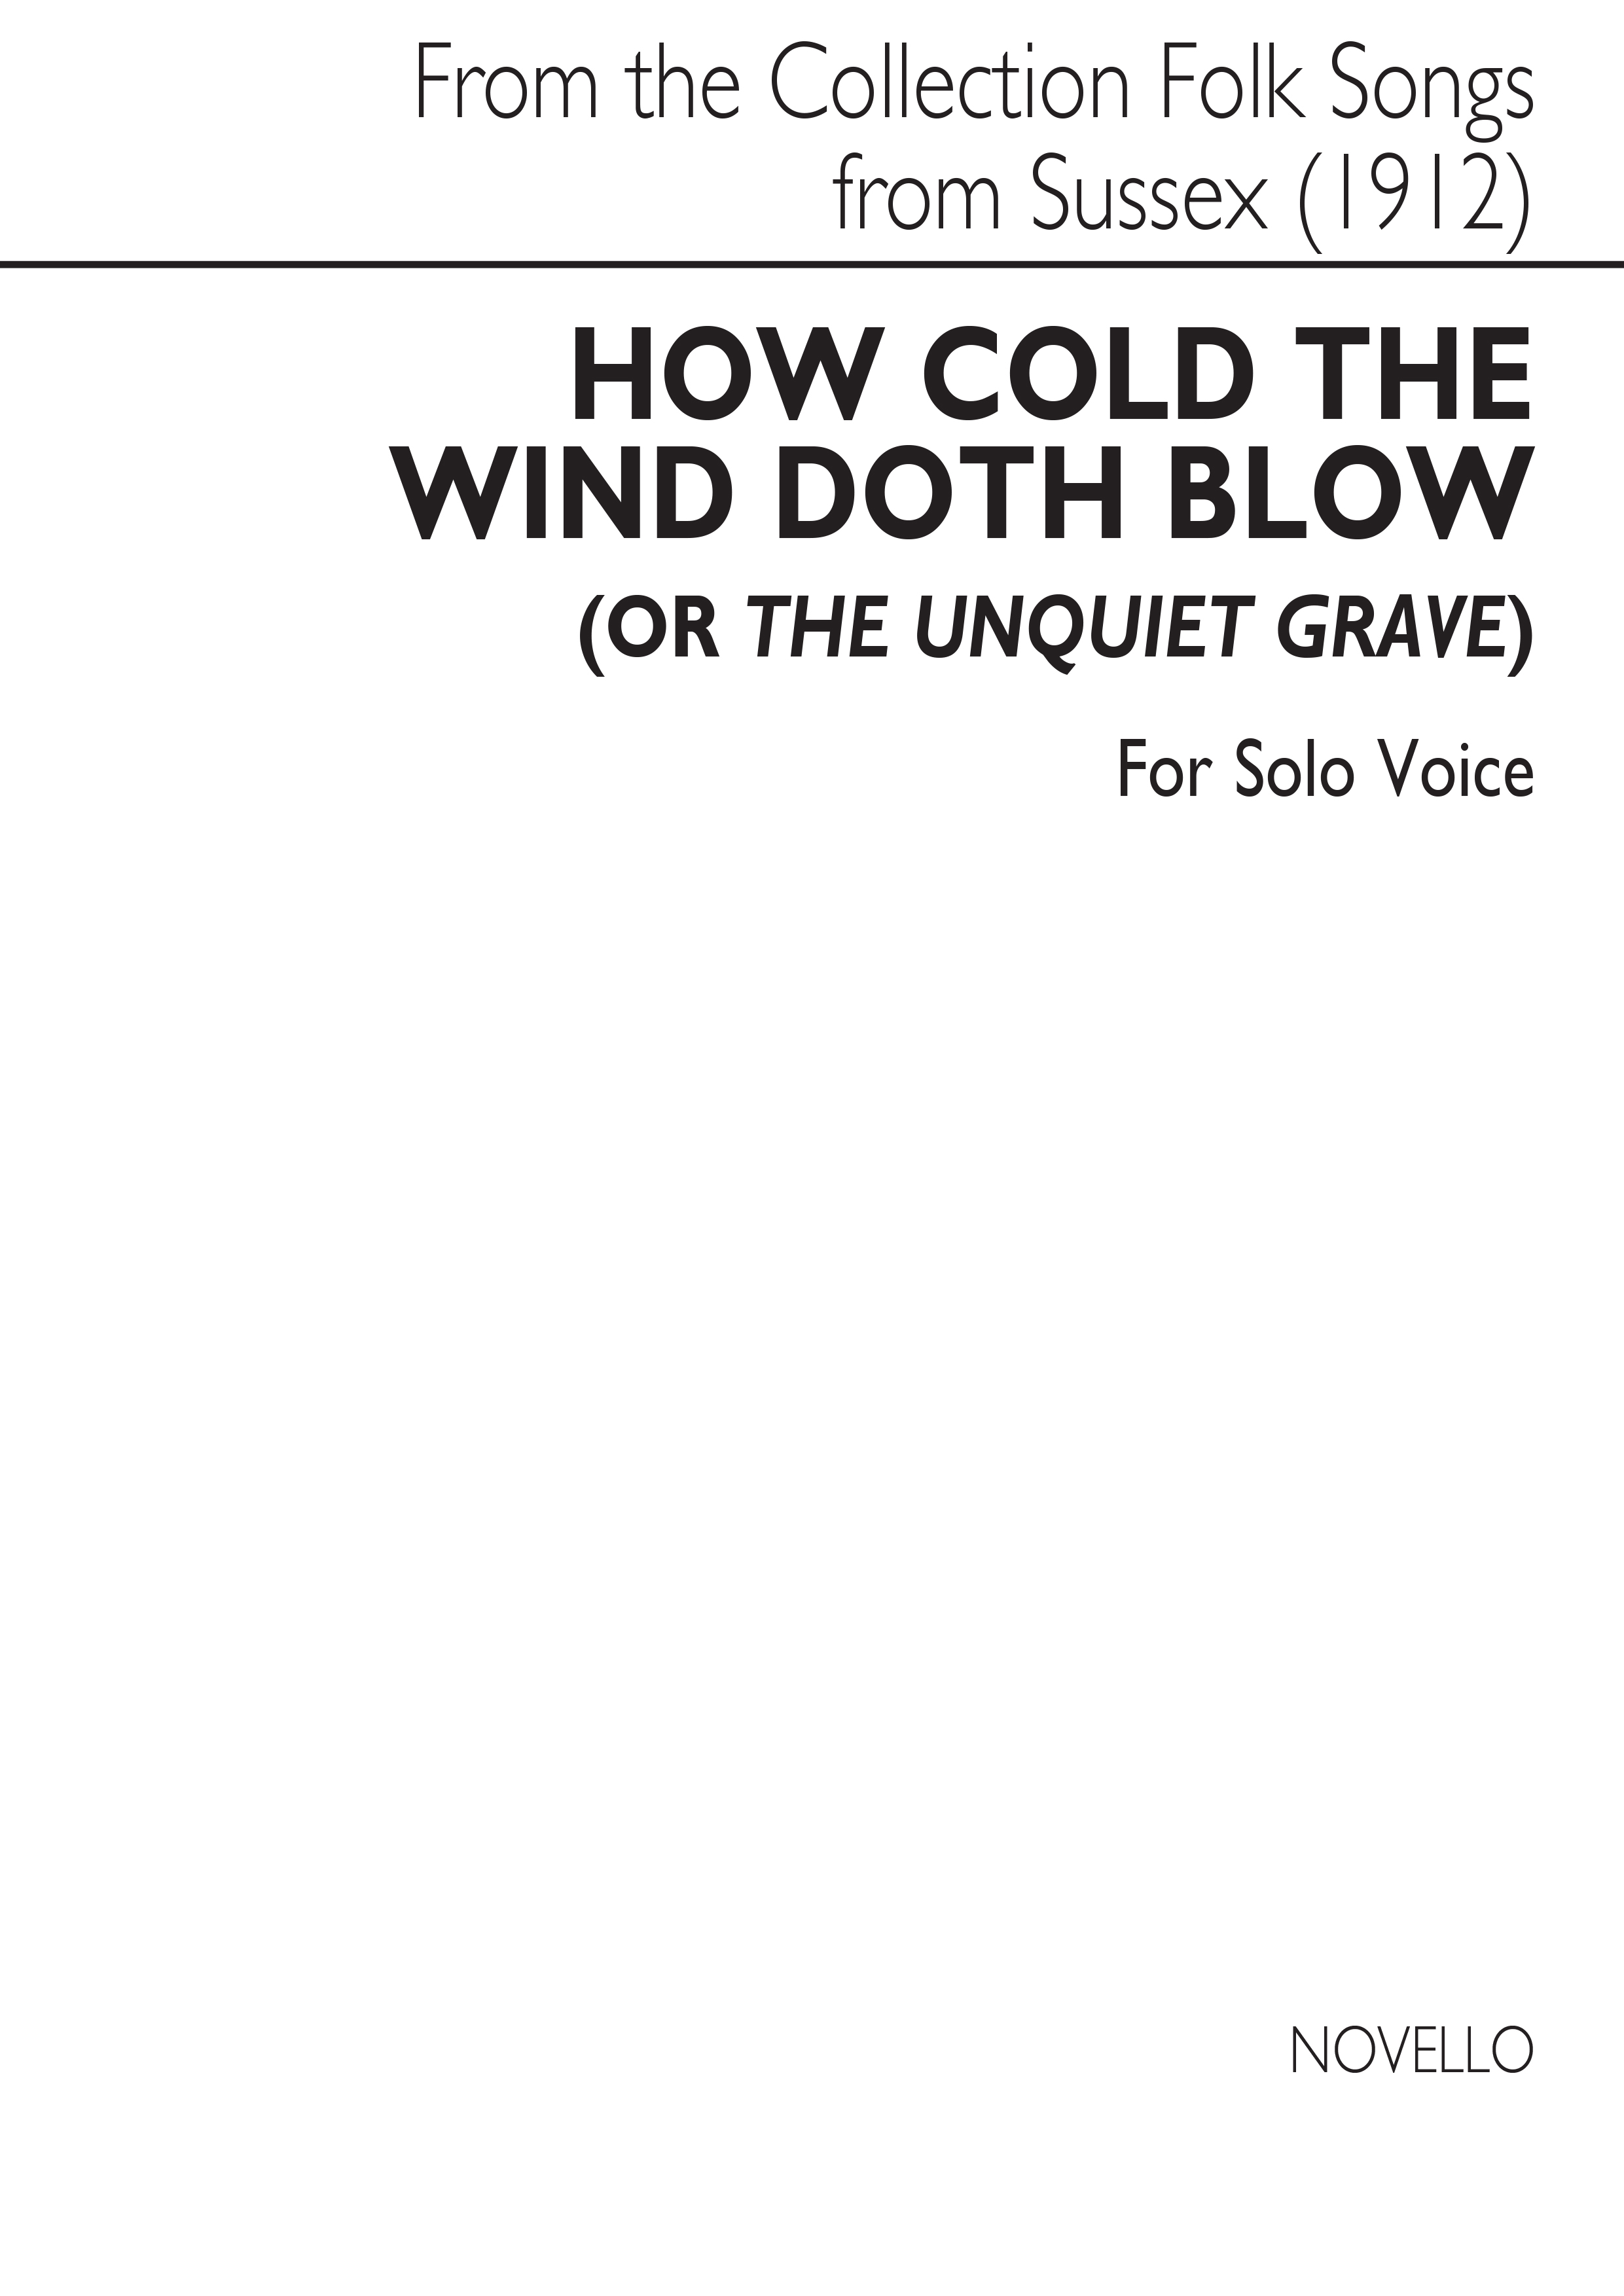 Ralph Vaughan Williams: How Cold The Wind Doth Blow (or The Unquiet Grave):